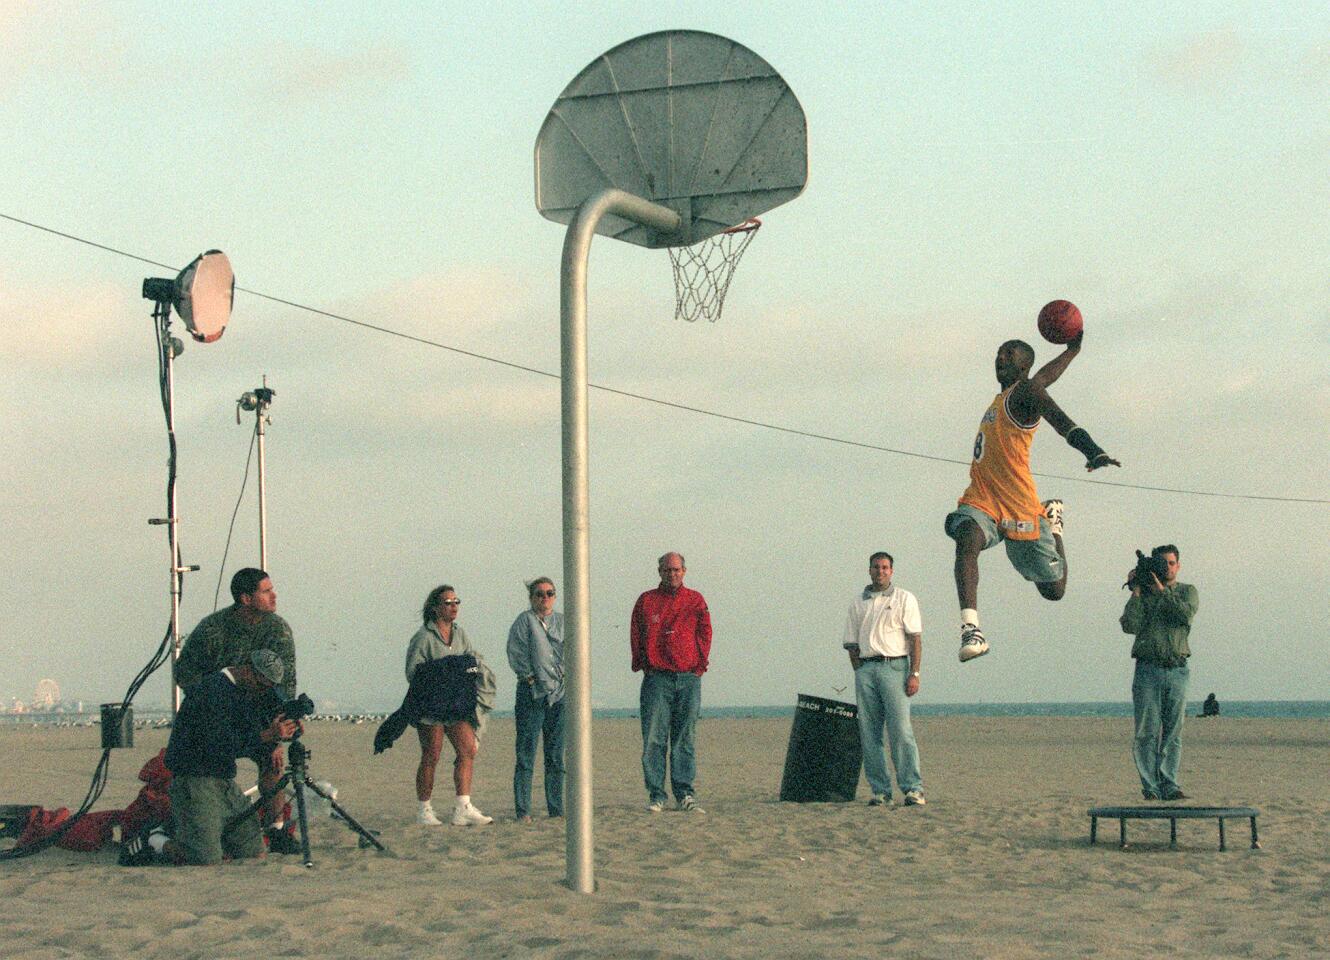 An airborne Kobe Bryant goes for a dunk while shooting a commercial.